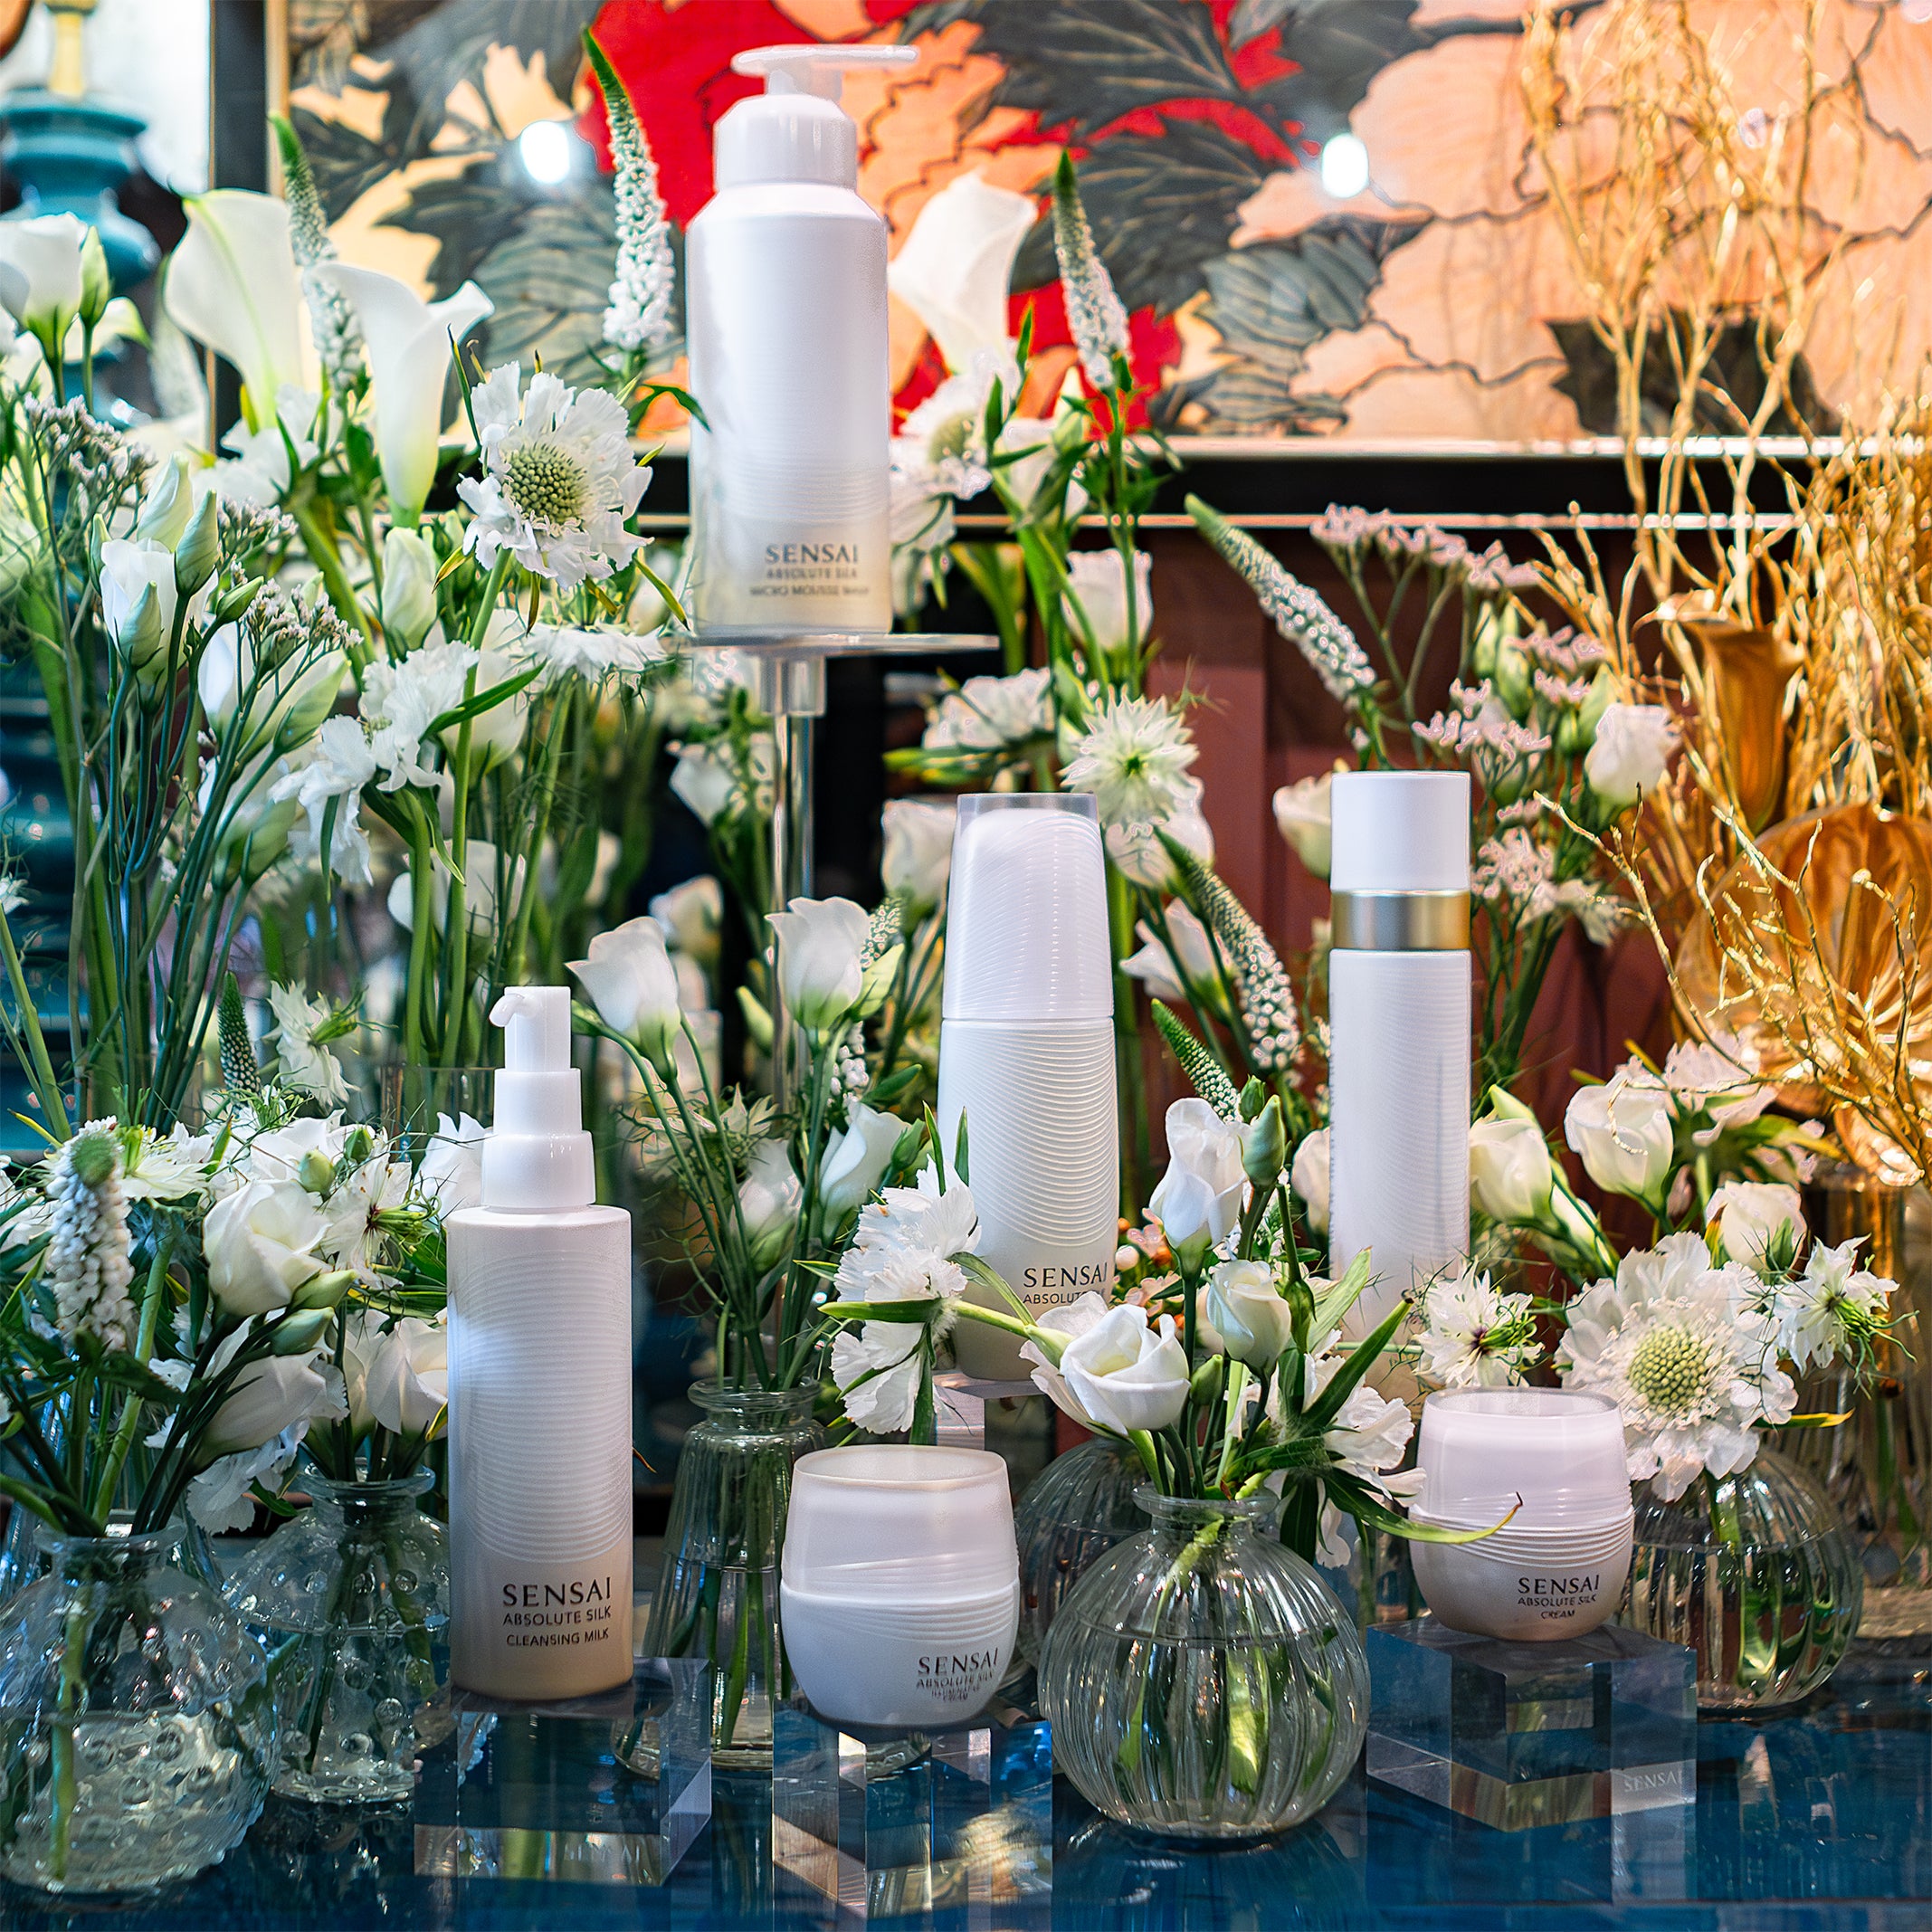 A stunning collection of Sensai skincare products surrounded by elegant white flowers in clear vases, arranged by Amarante London for the product launch.